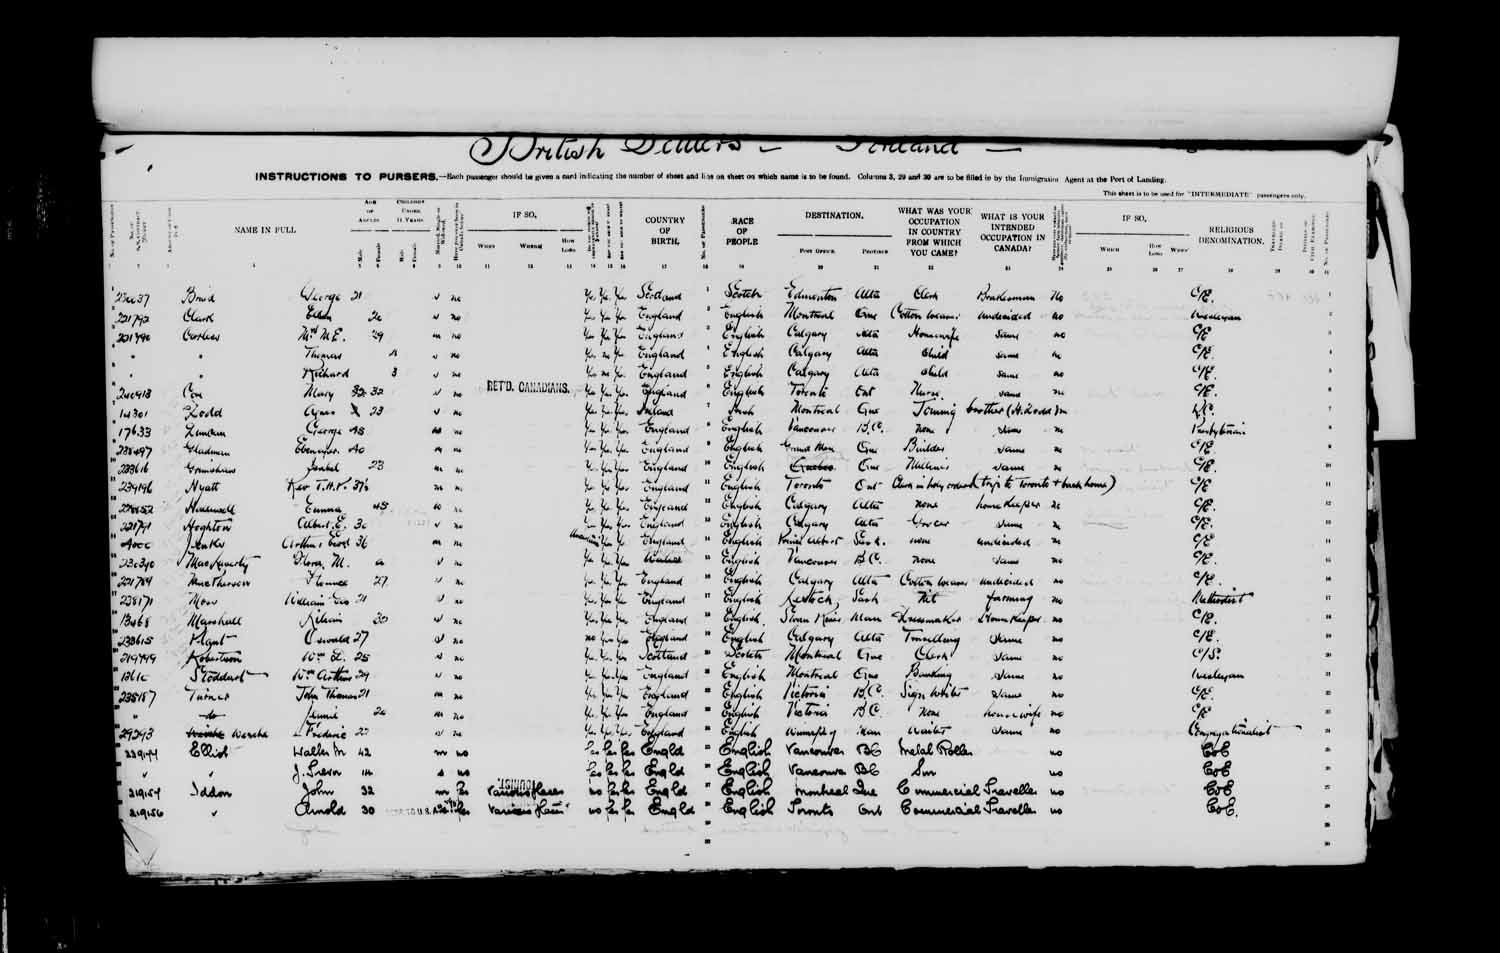 Digitized page of Passenger Lists for Image No.: e003622981